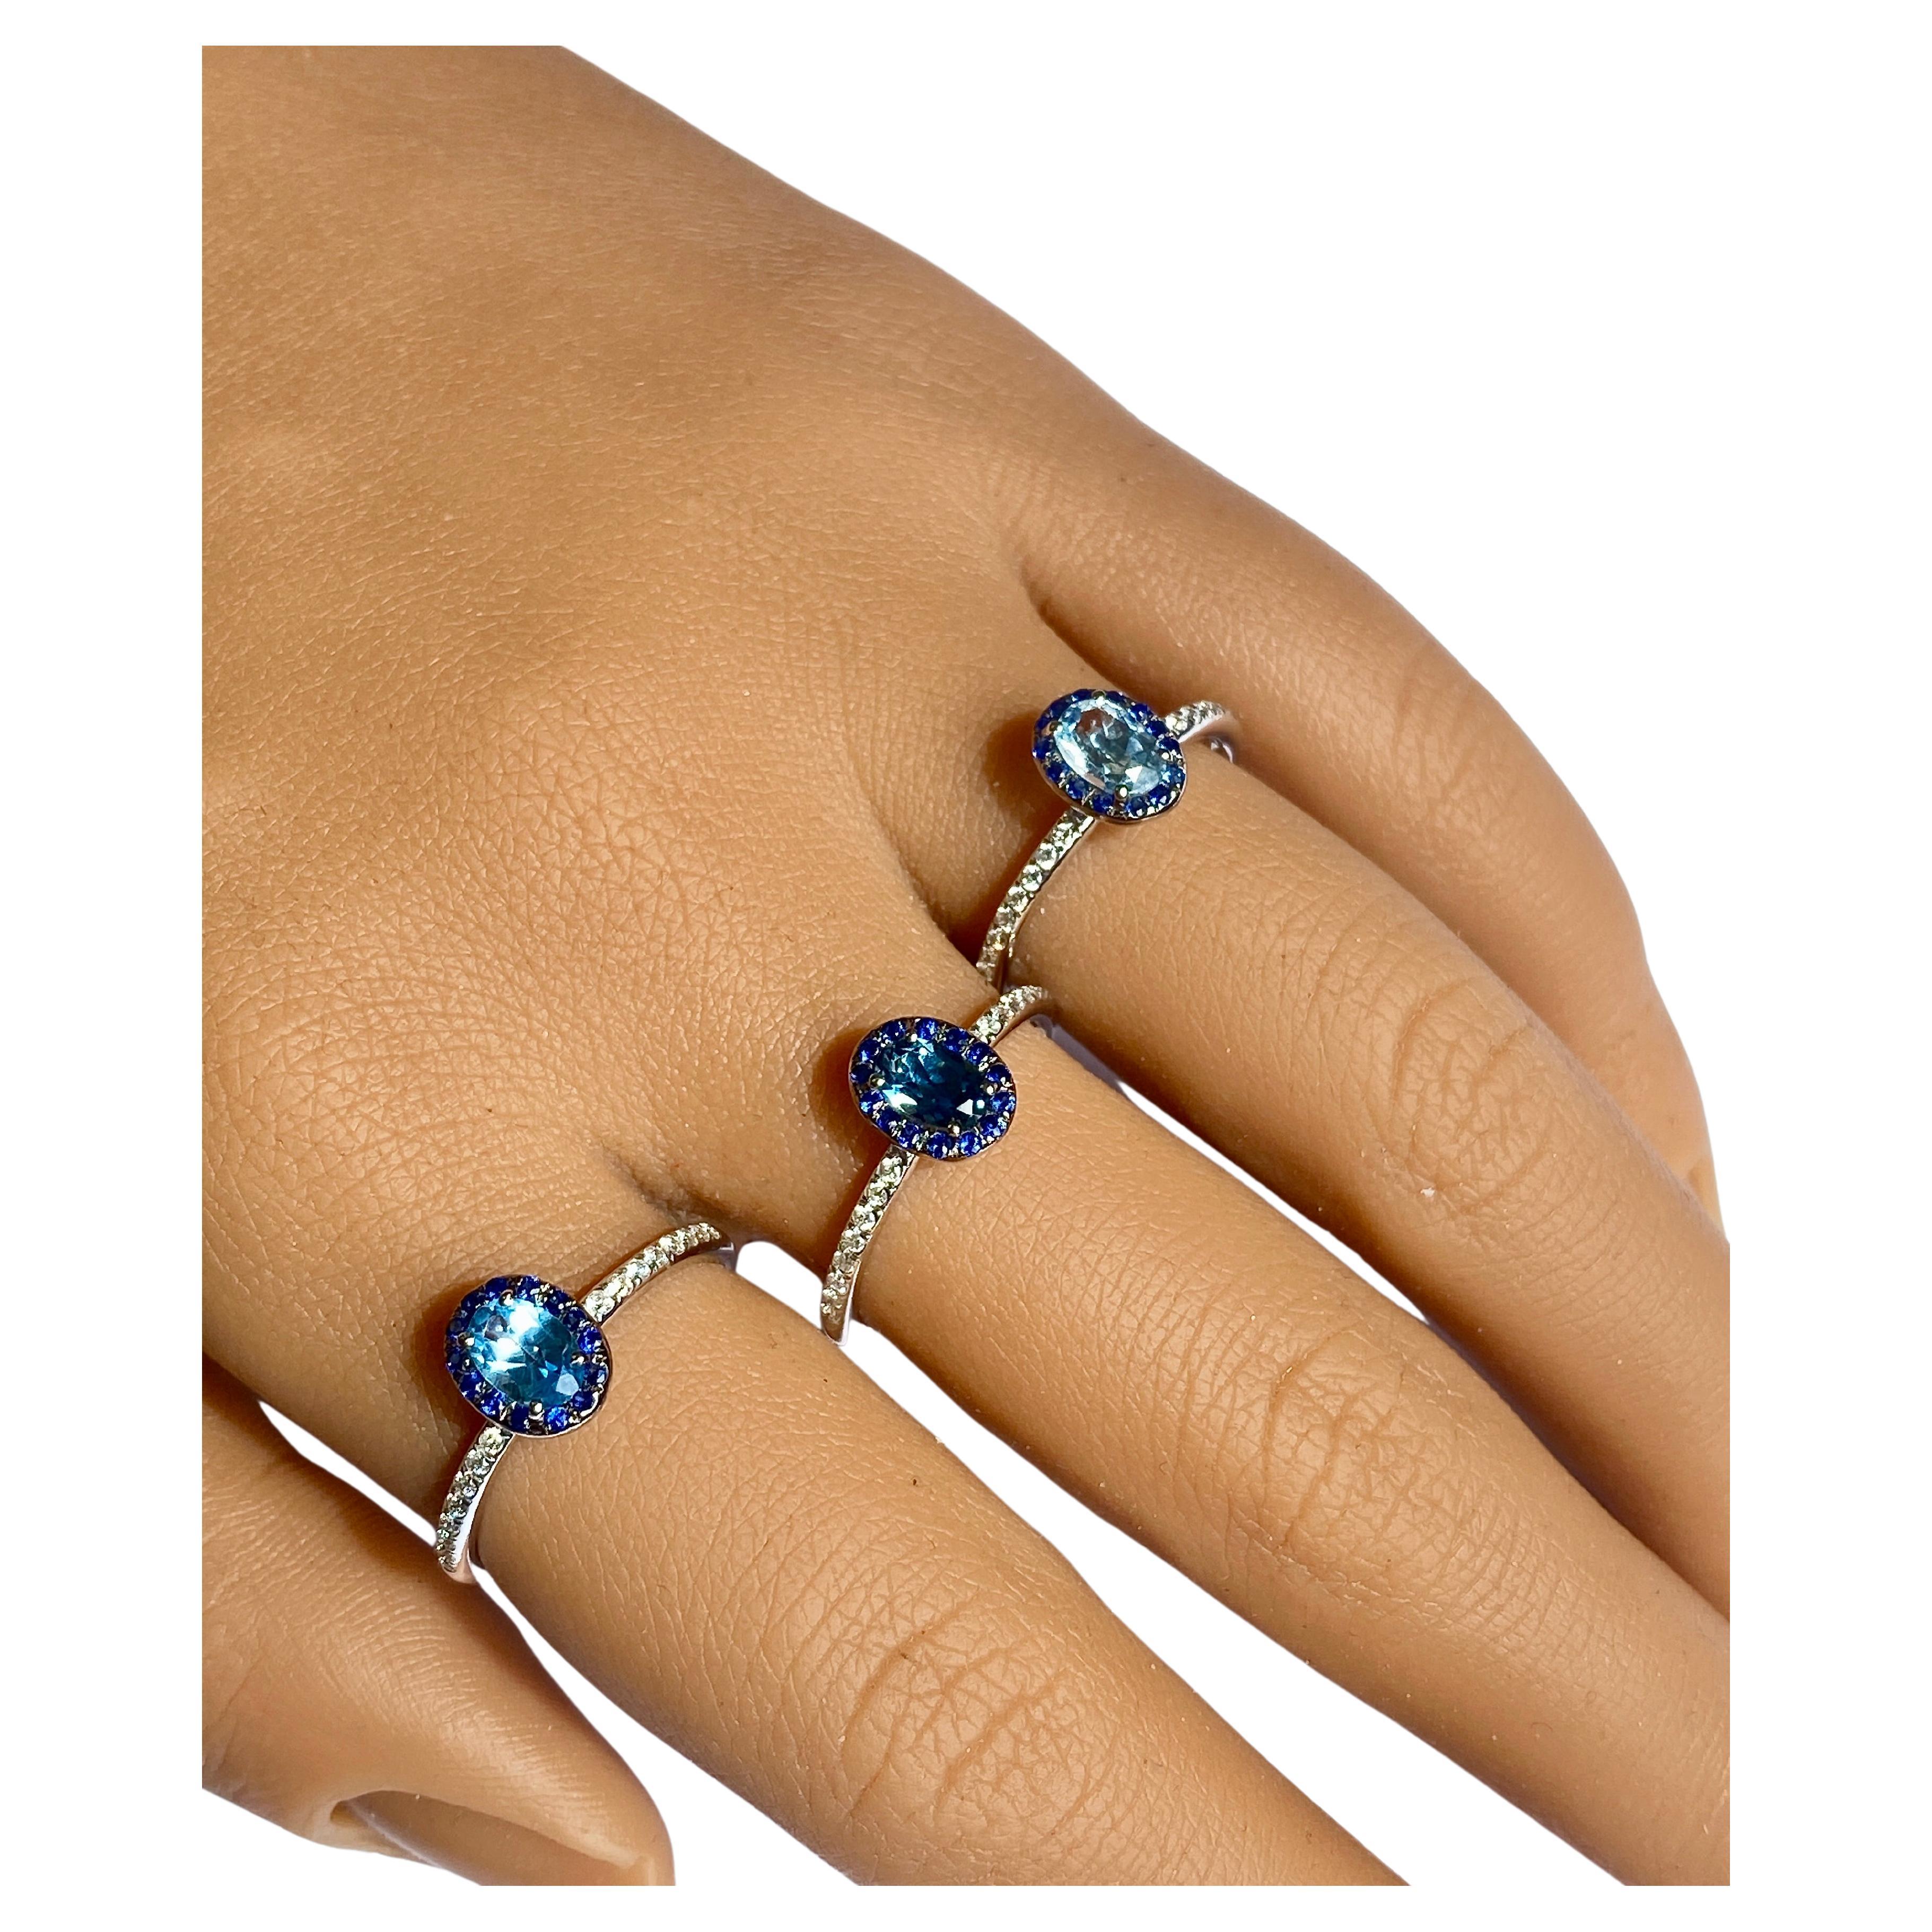 Gemstone Solitaire Ring, Stackable Diamond Rings, Blue Gemstone Solid Gold Ring  For Sale